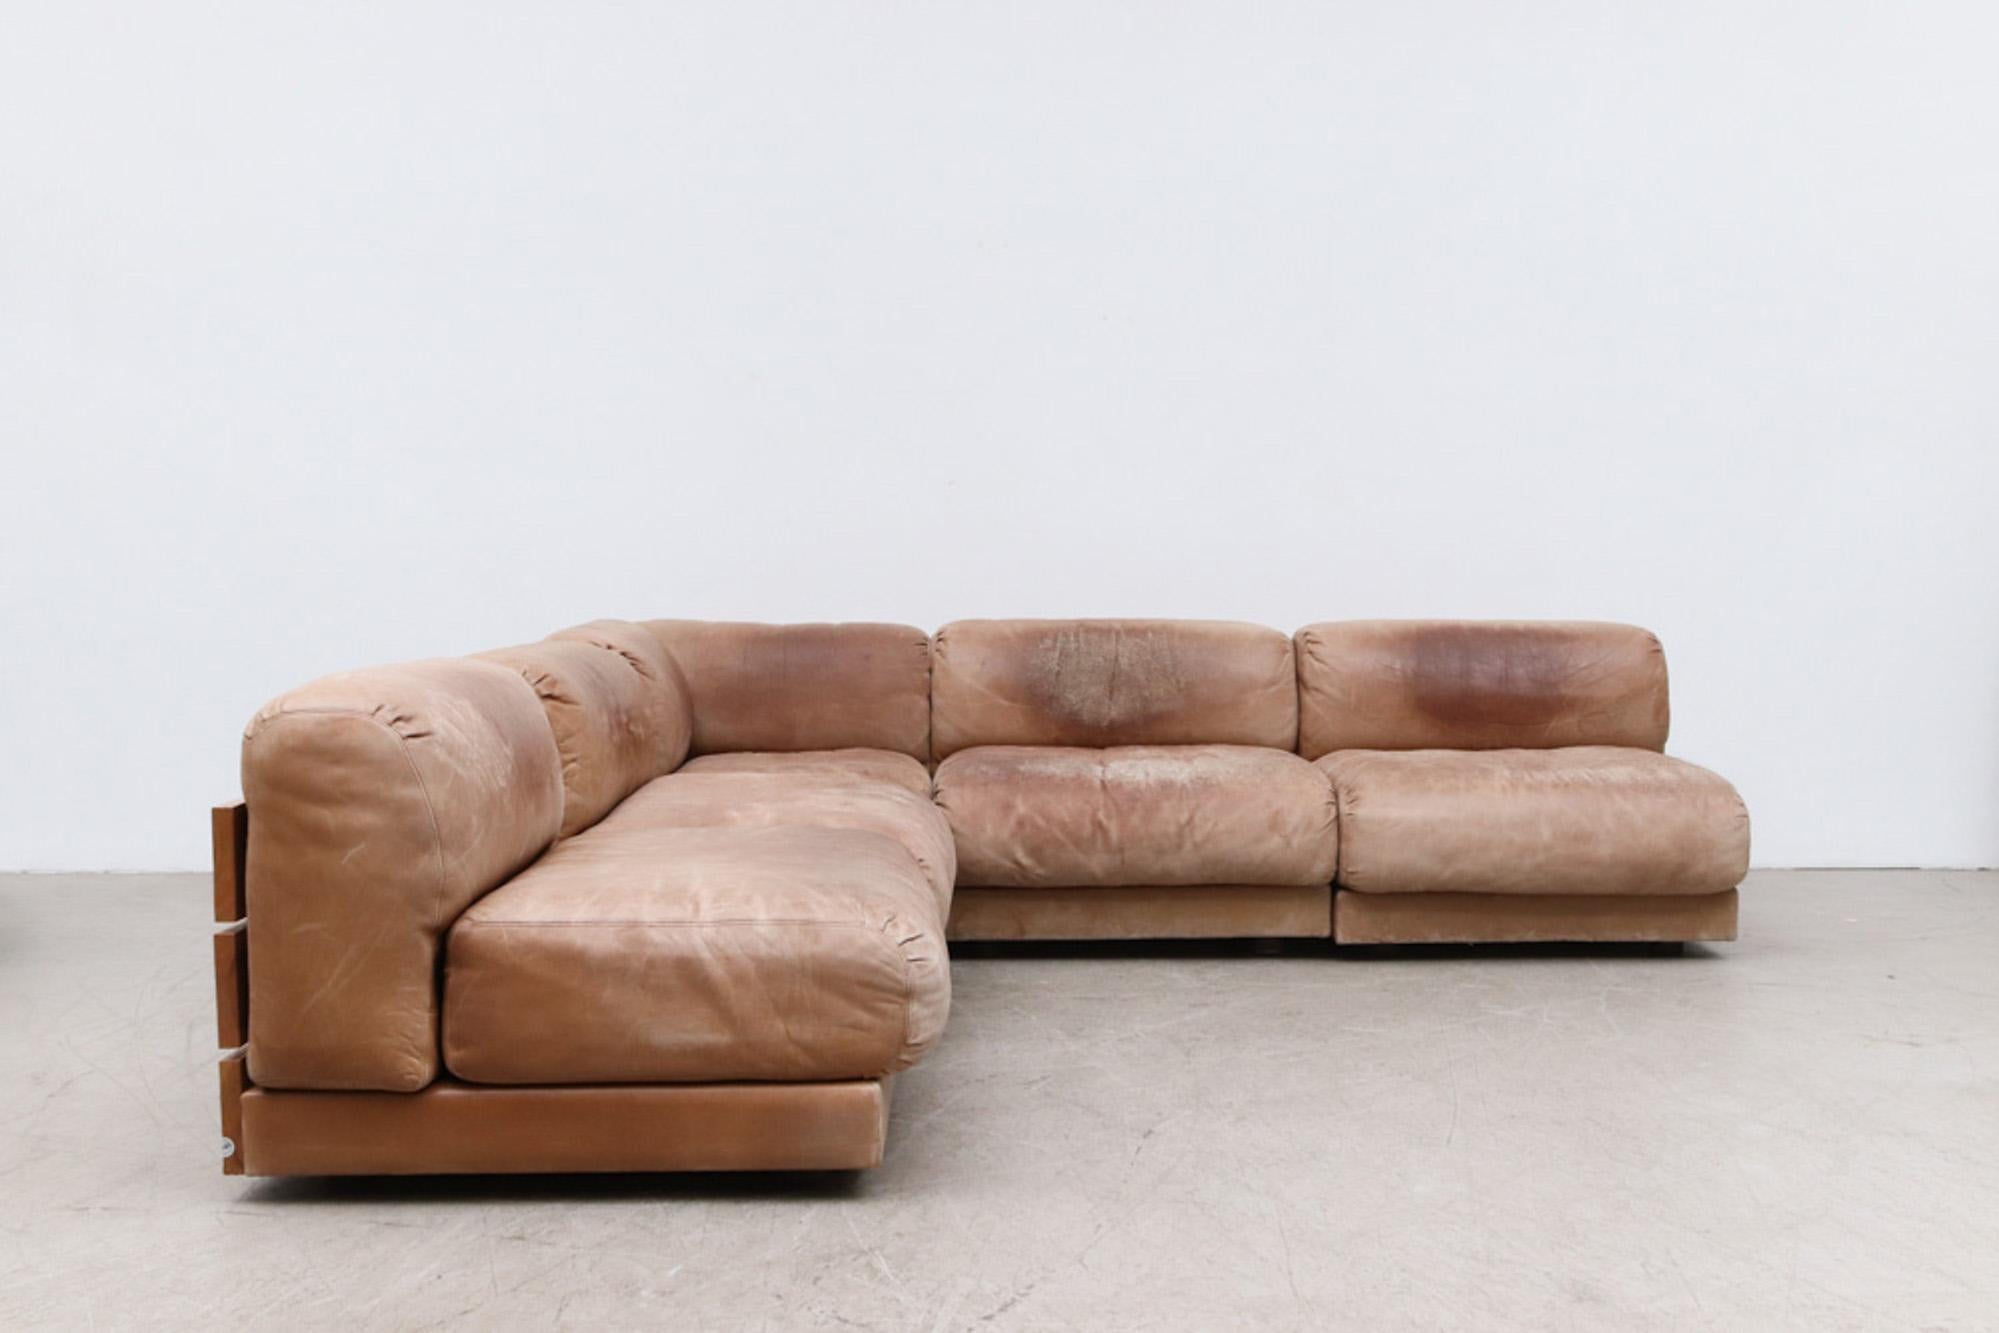 Handsome Dutch Leather and Pine Plank Sectional Sofa 1